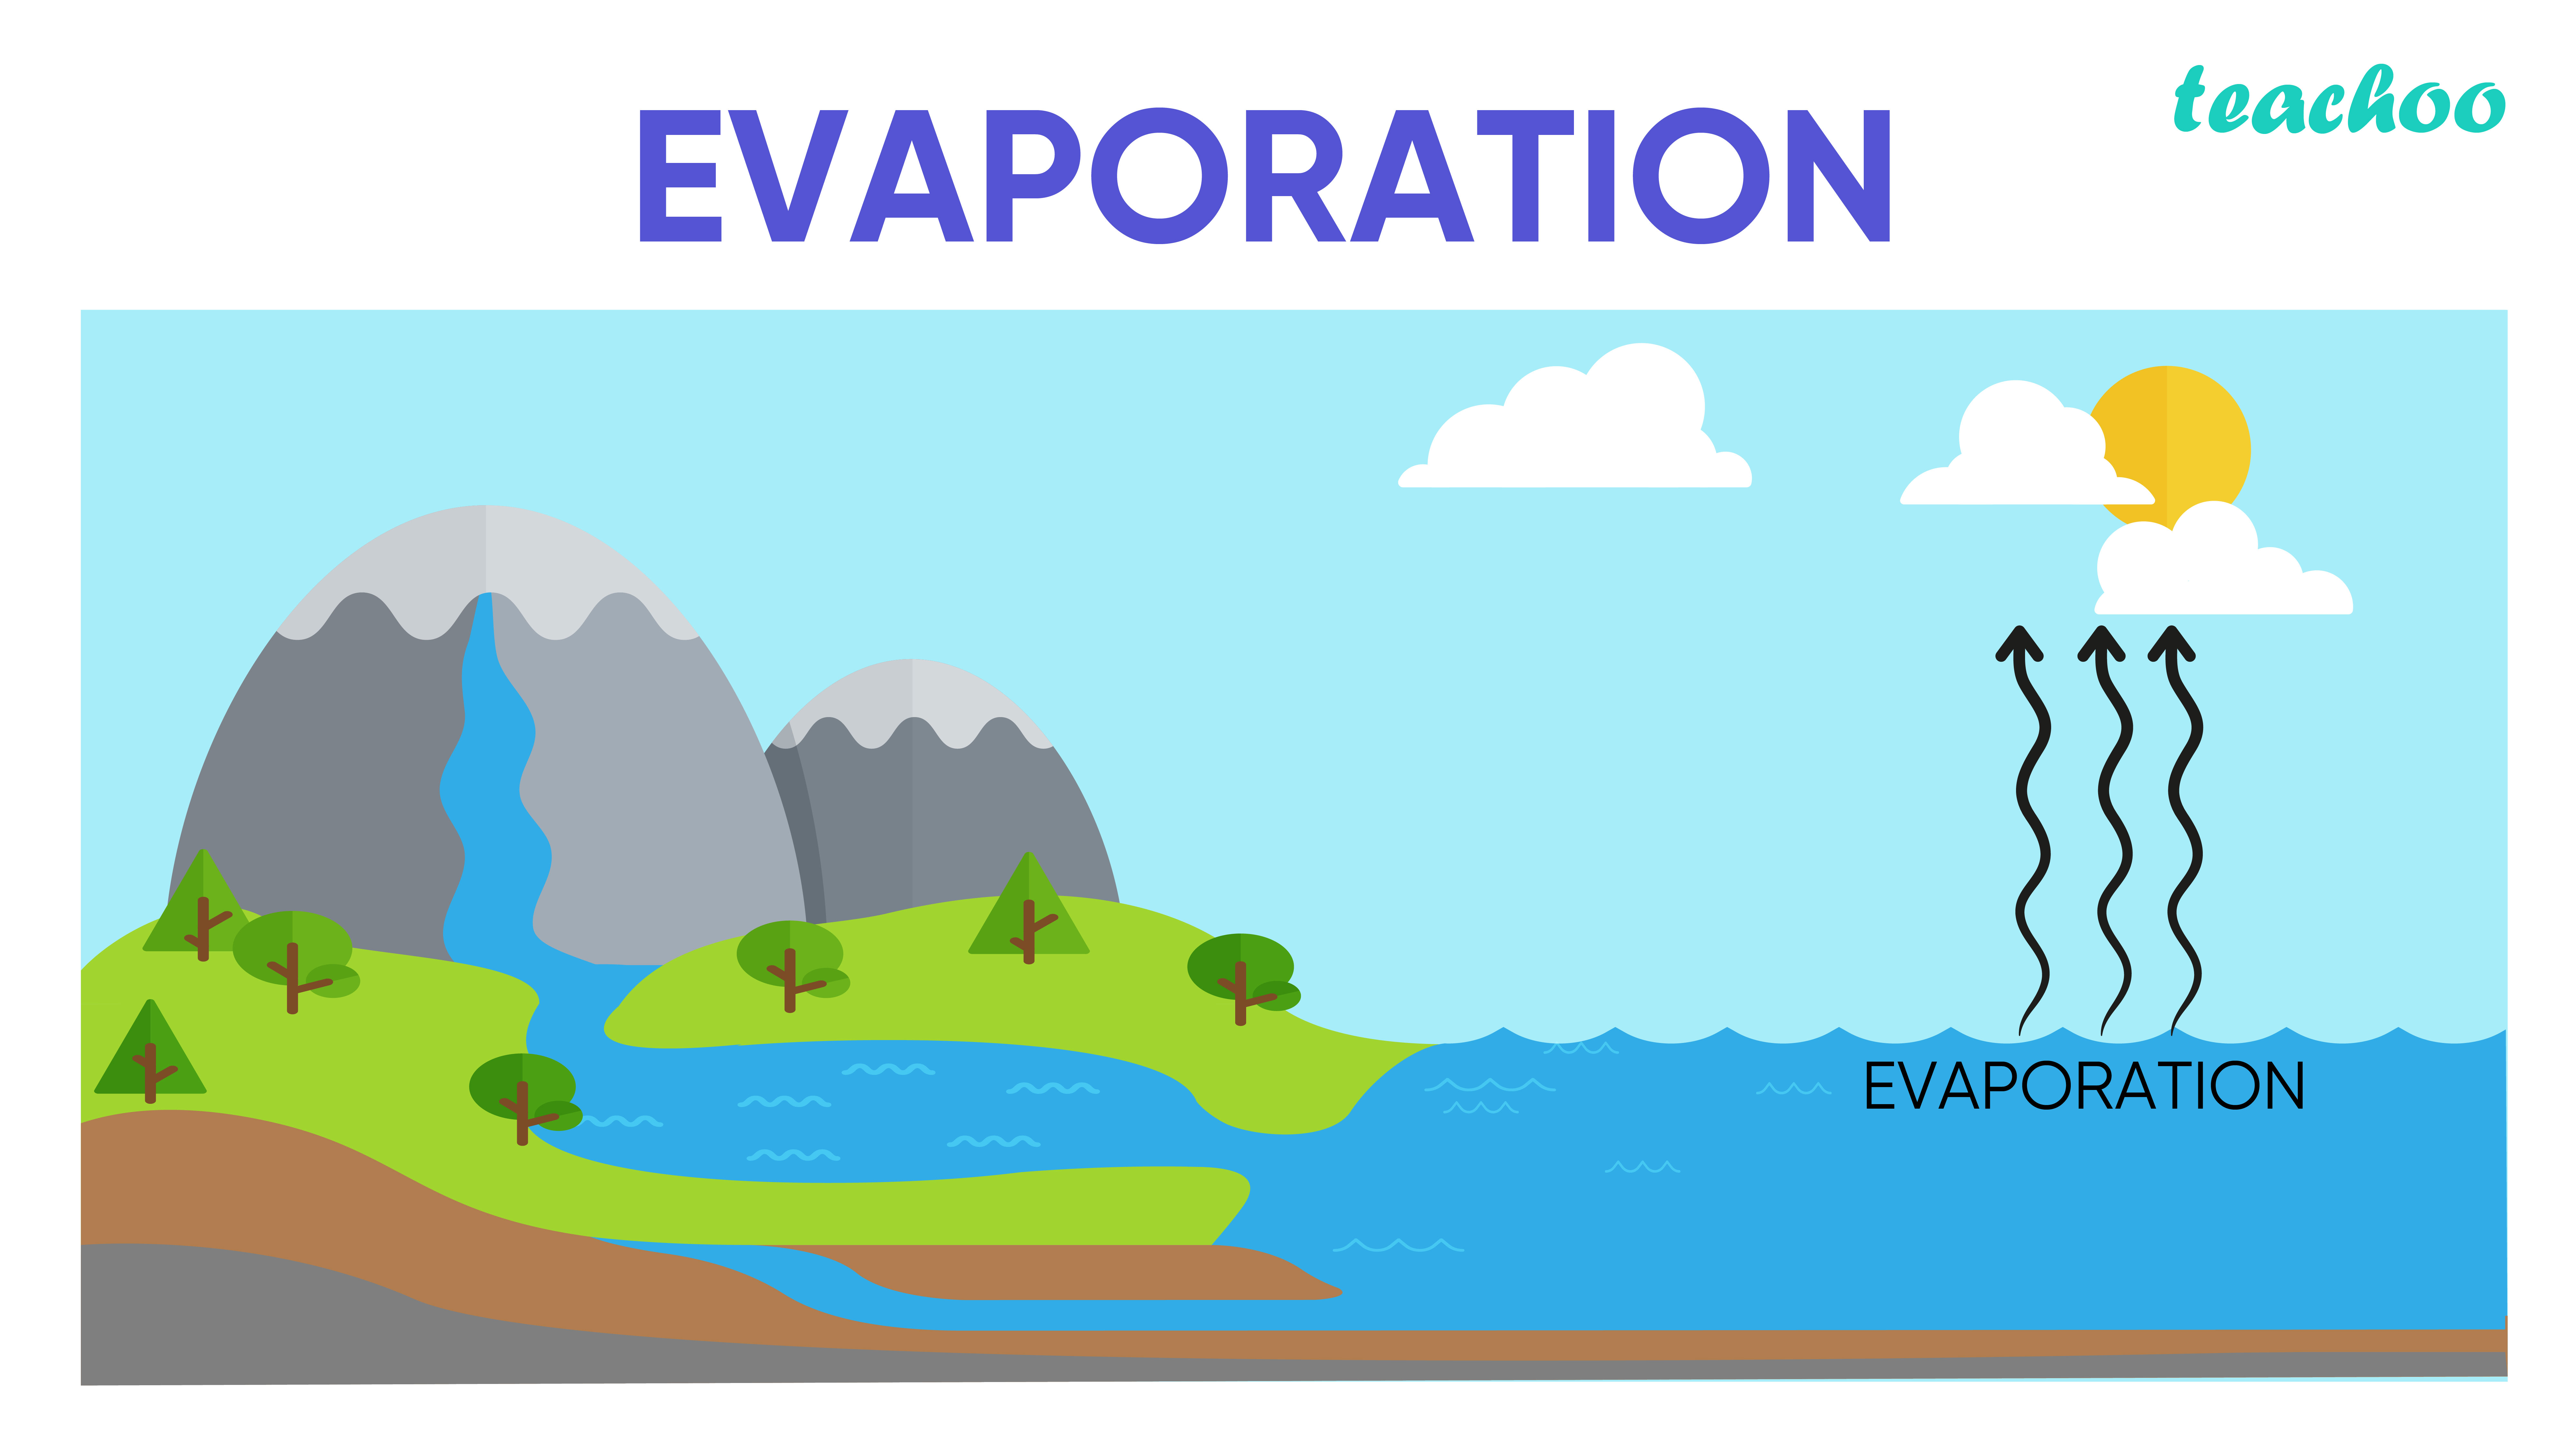 evaporation-meaning-and-factors-affecting-it-teachoo